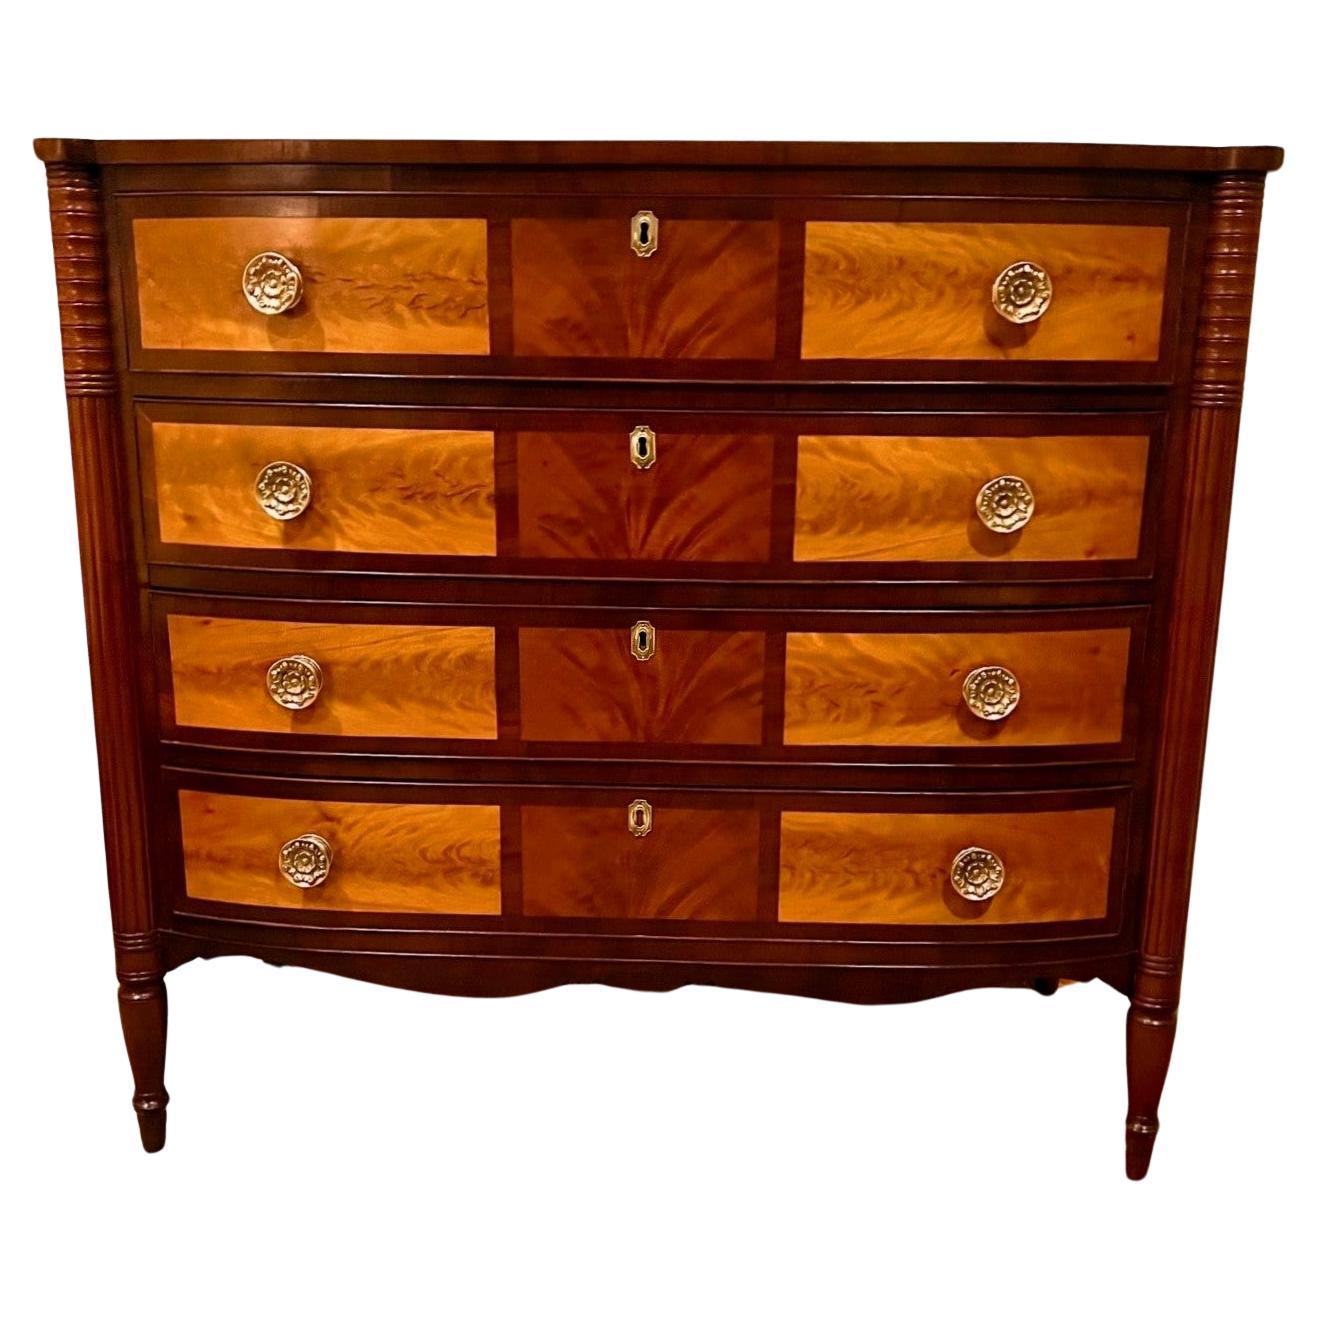 Federal Swell-Front 4-Drawer Chest, New England, Circa:1810